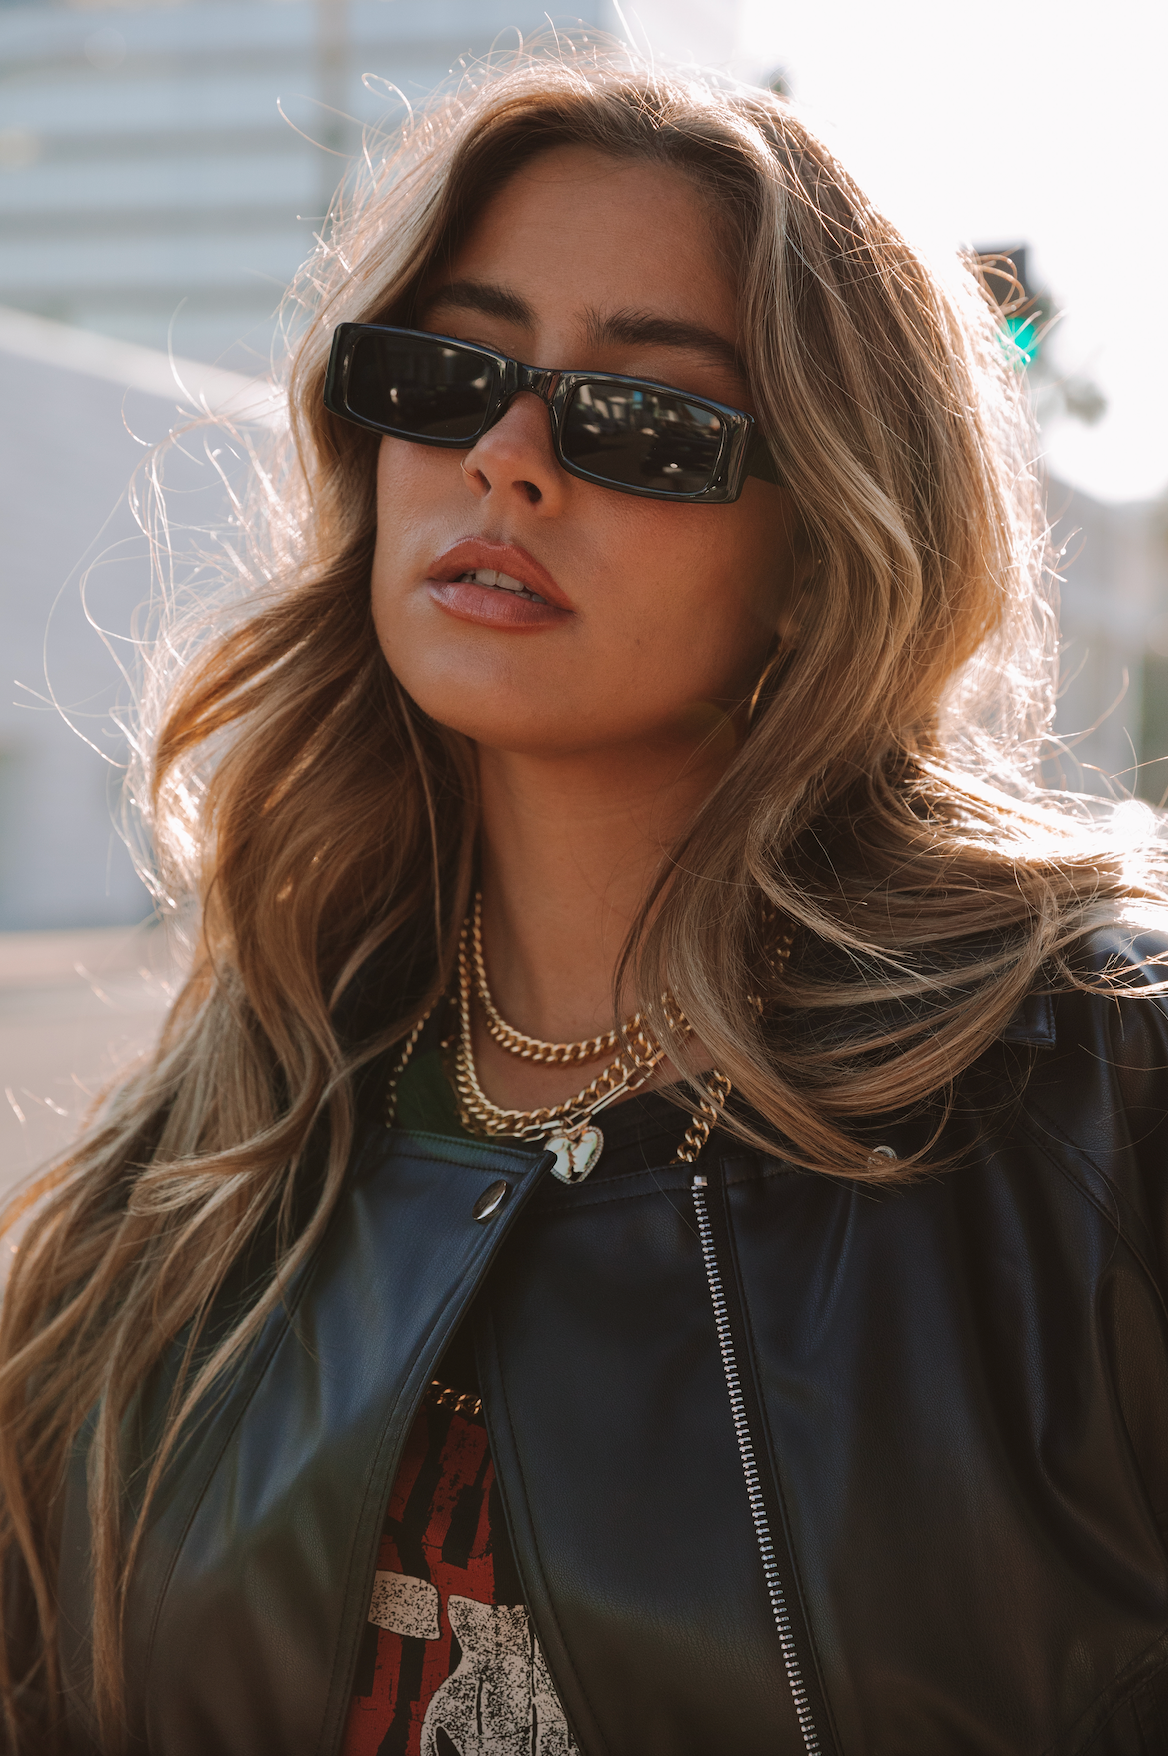 The Chic Micro Sunnies